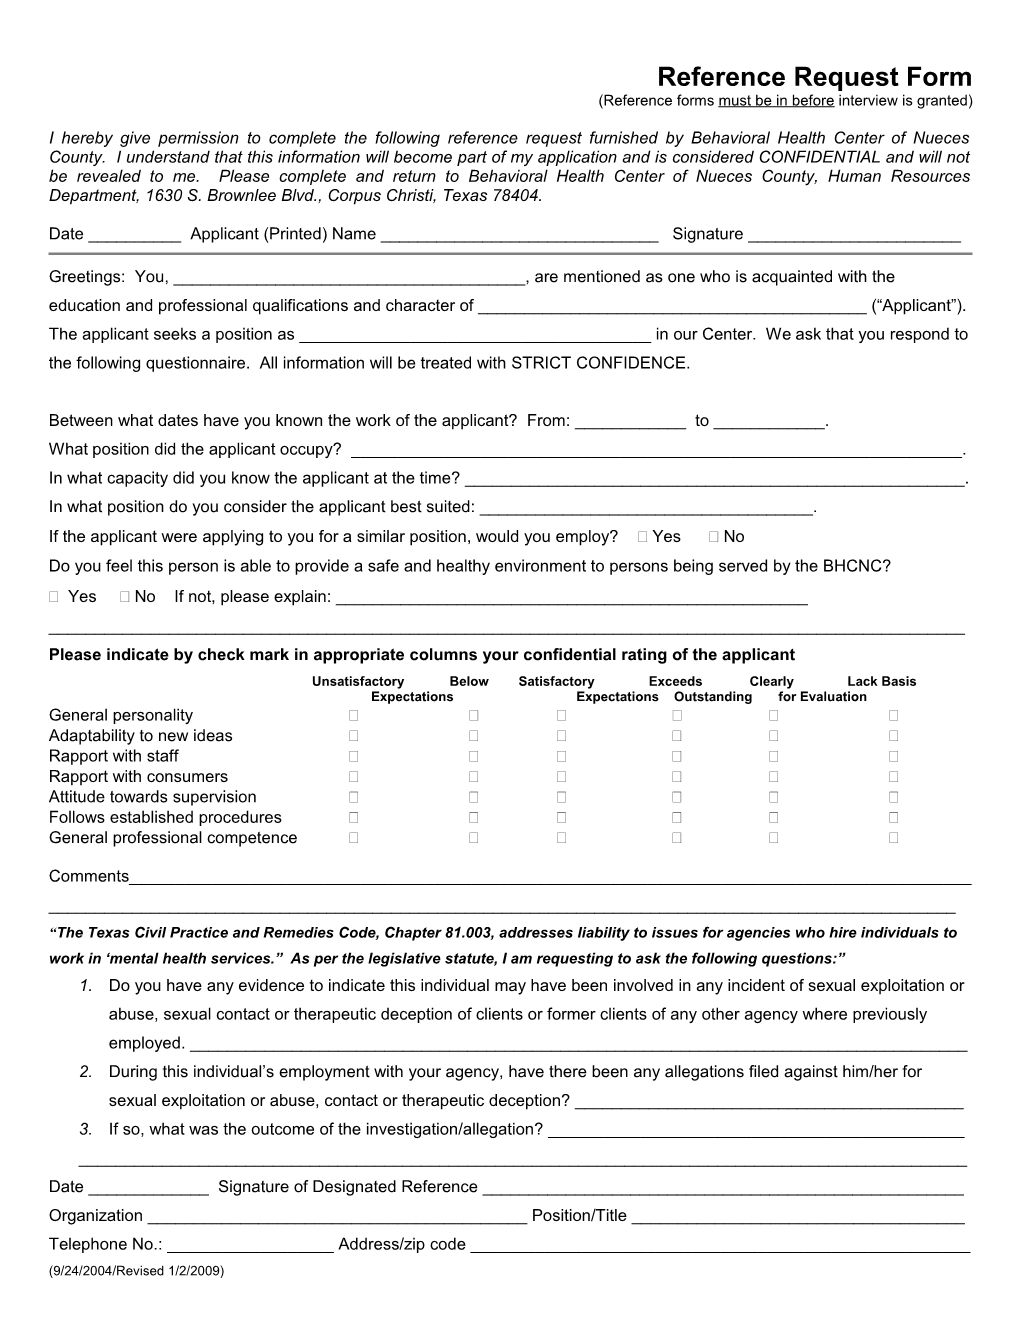 Reference Request Form